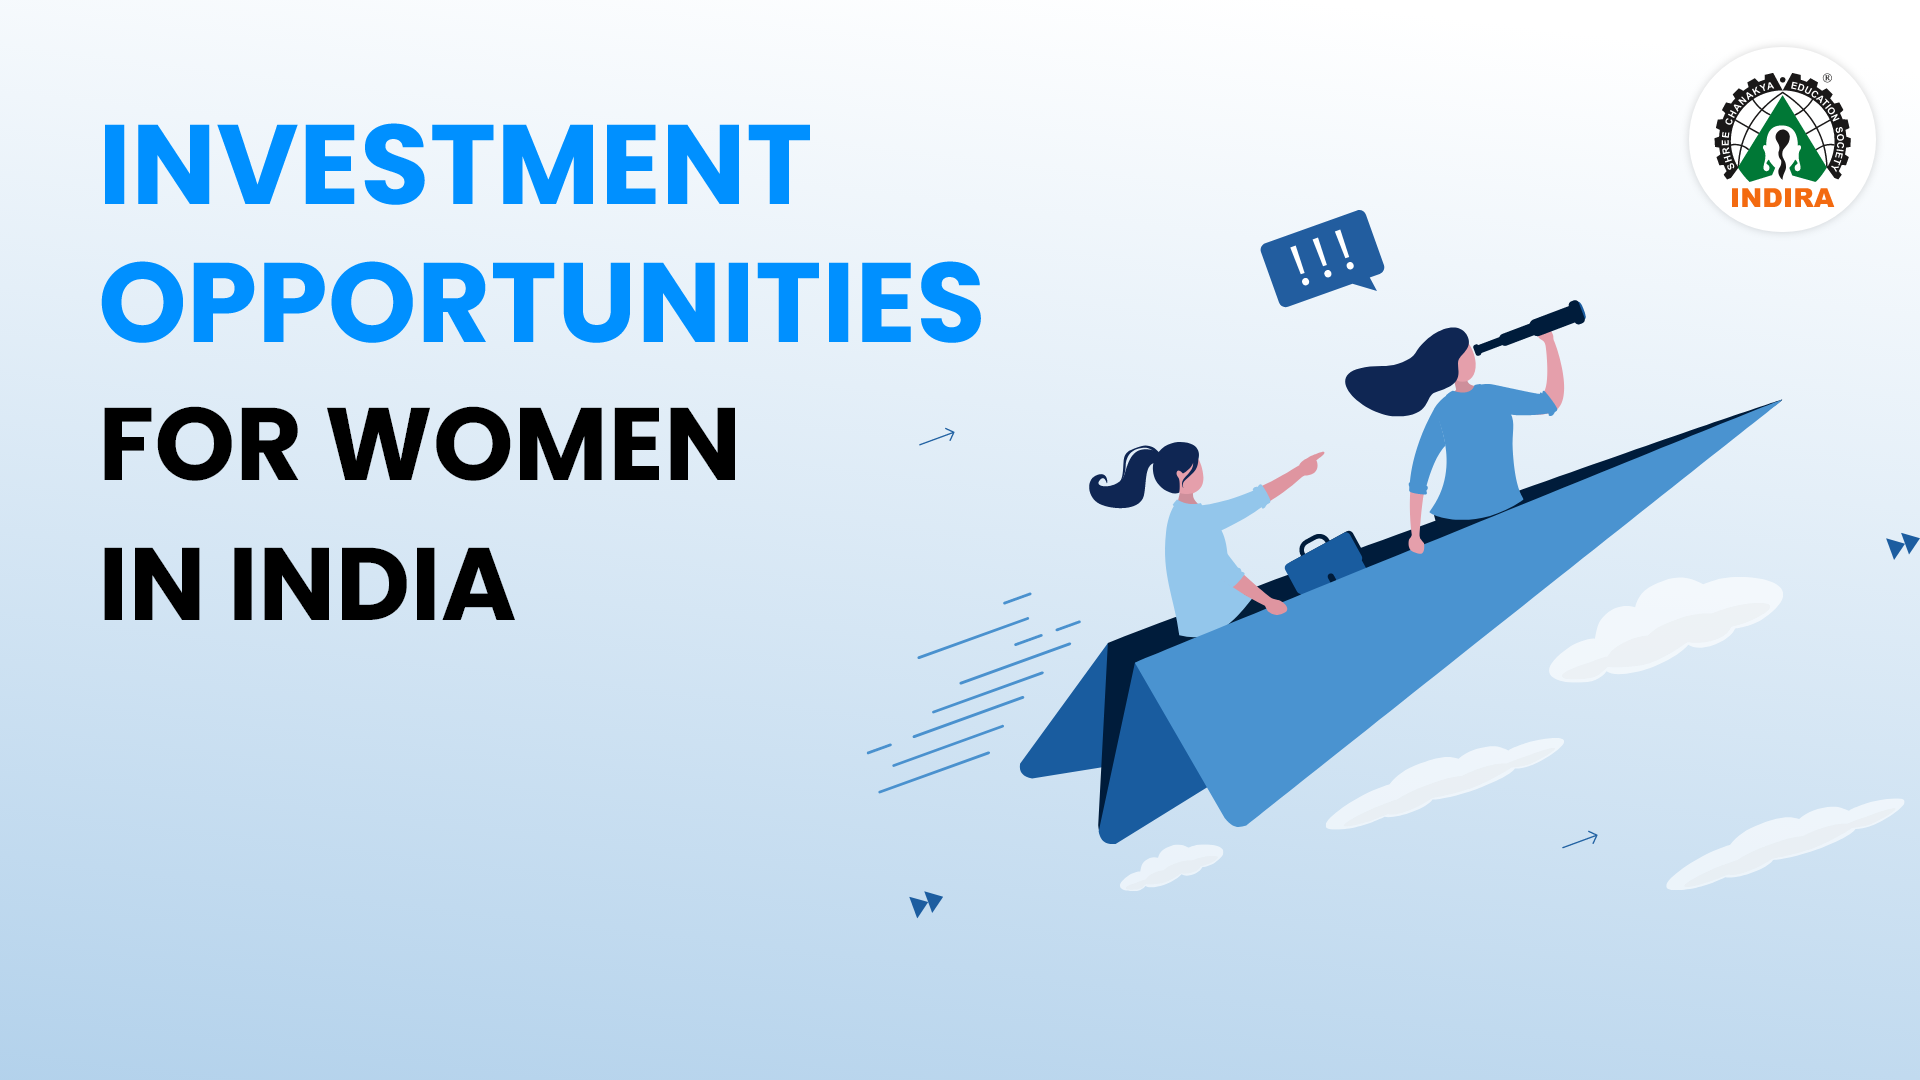 Investment Opportunities for Women in India